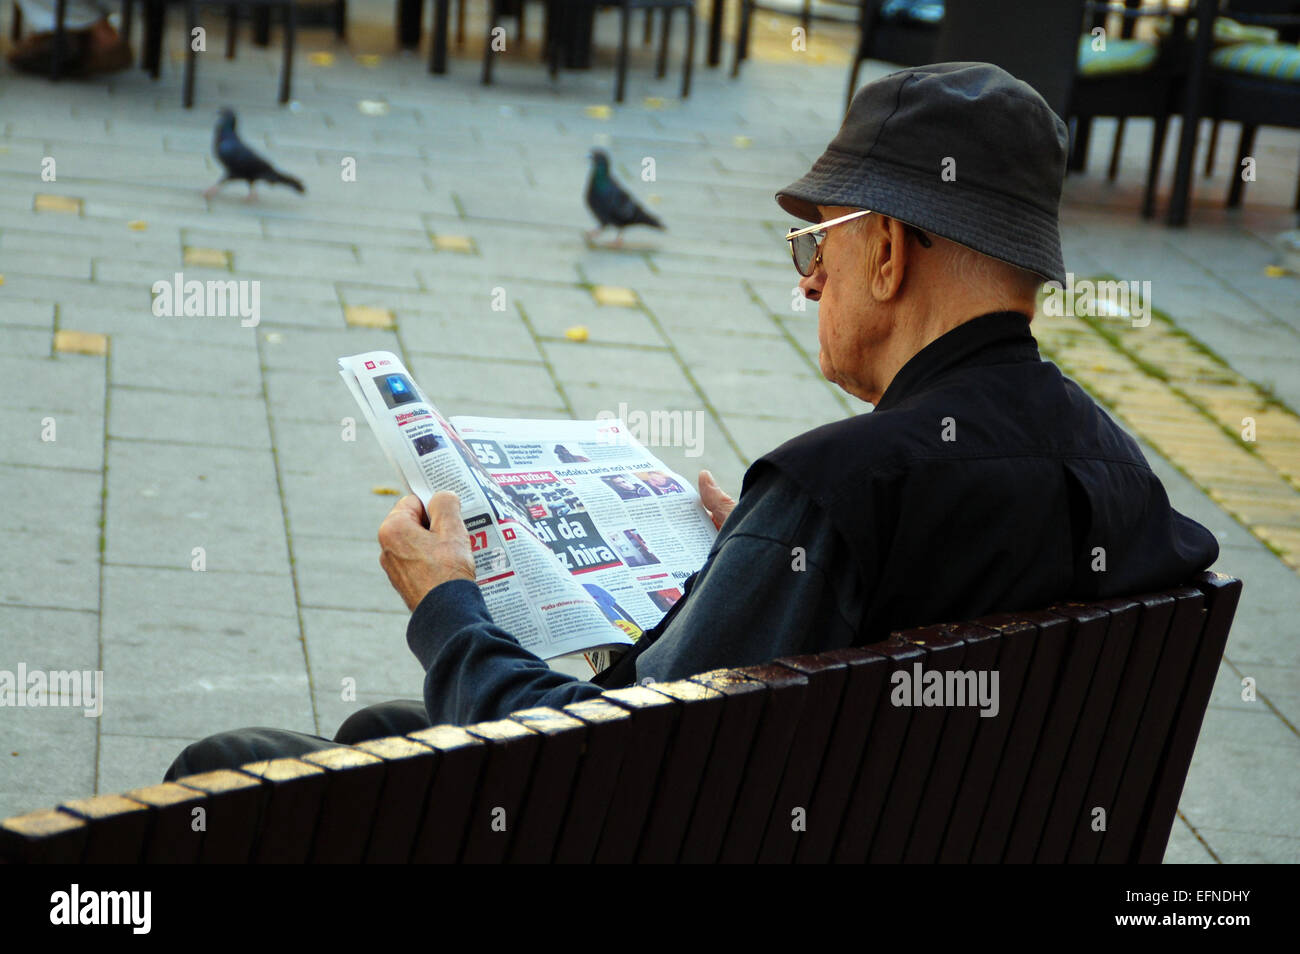 In a relaxed summer afternoon and the man in black who reads the newspaper on a bench in the city center. Stock Photo